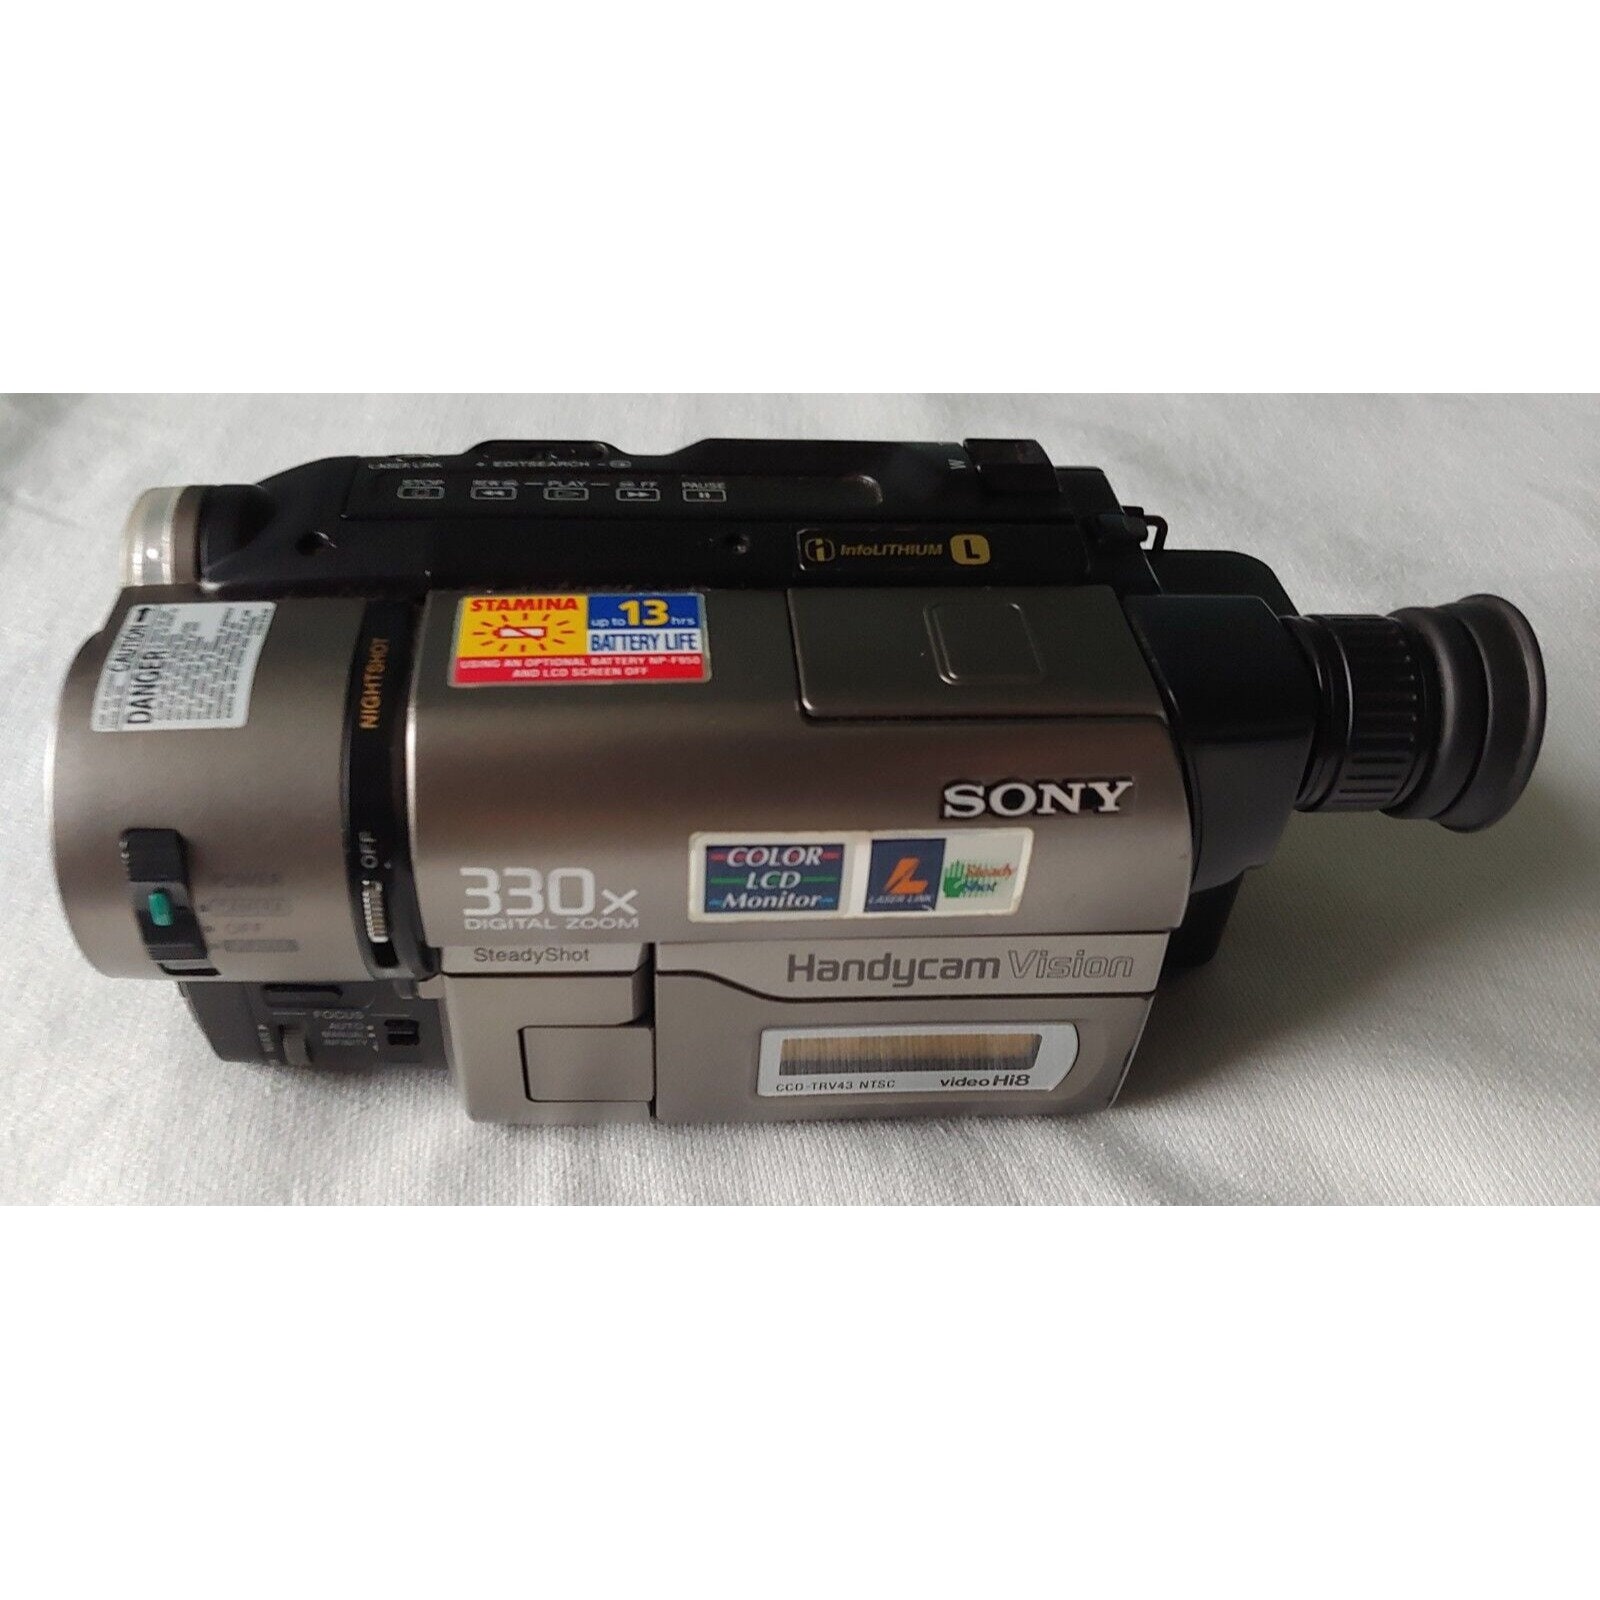 anghie santos recommends sony handycam night vision pic